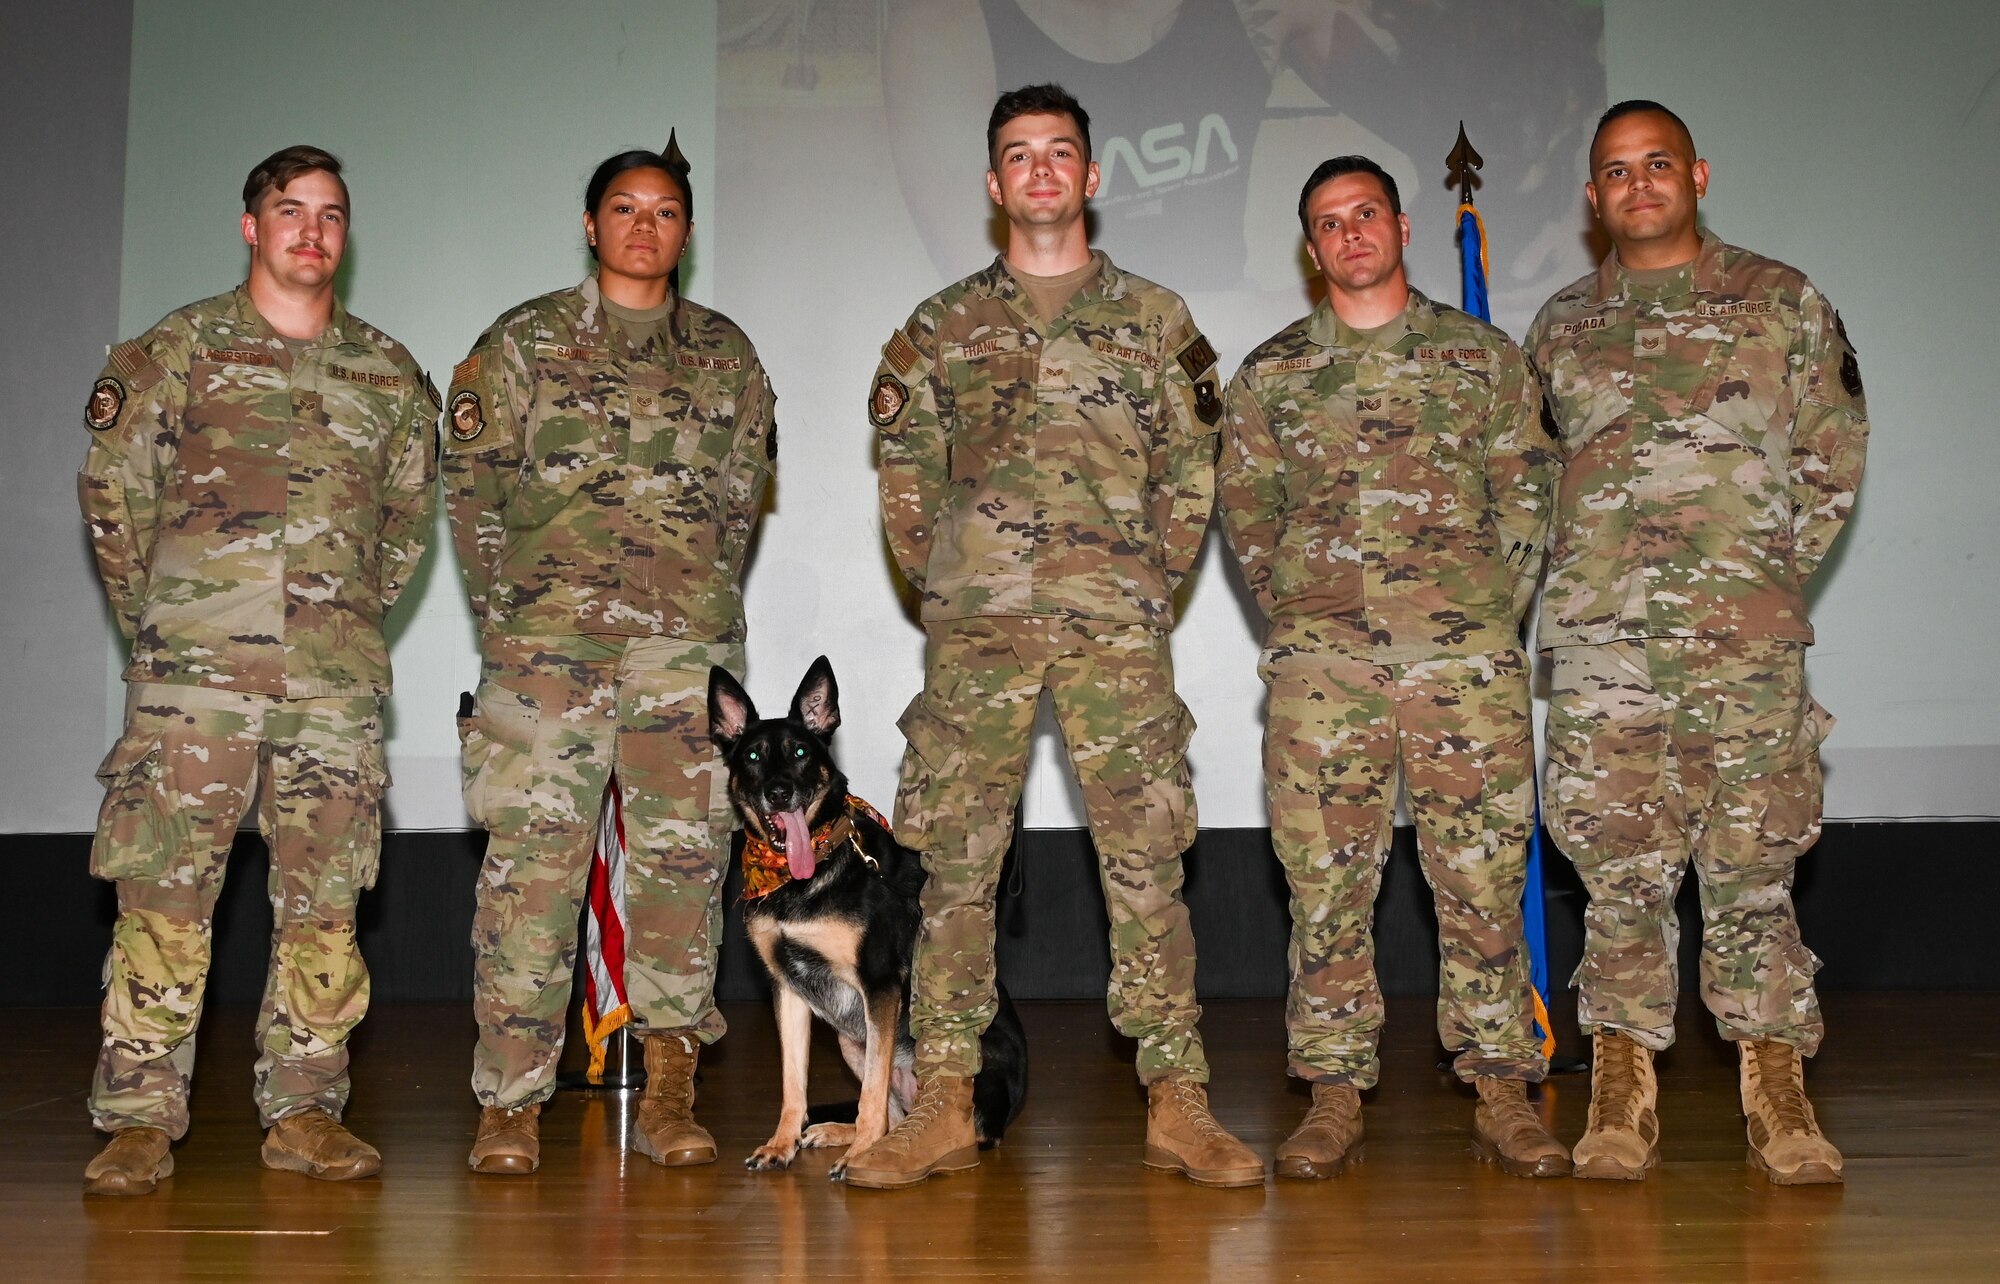 Cora, 97th Security Forces Squadron (SFS) military working dog (MWD), poses with the 97th SFS MWD team during Cora’s retirement ceremony at Altus Air Force Base (AAFB), Oklahoma, Sep. 15, 2022. Cora is the first MWD to retire from AAFB in three years. (U.S. Air Force photo by Senior Airman Kayla Christenson)